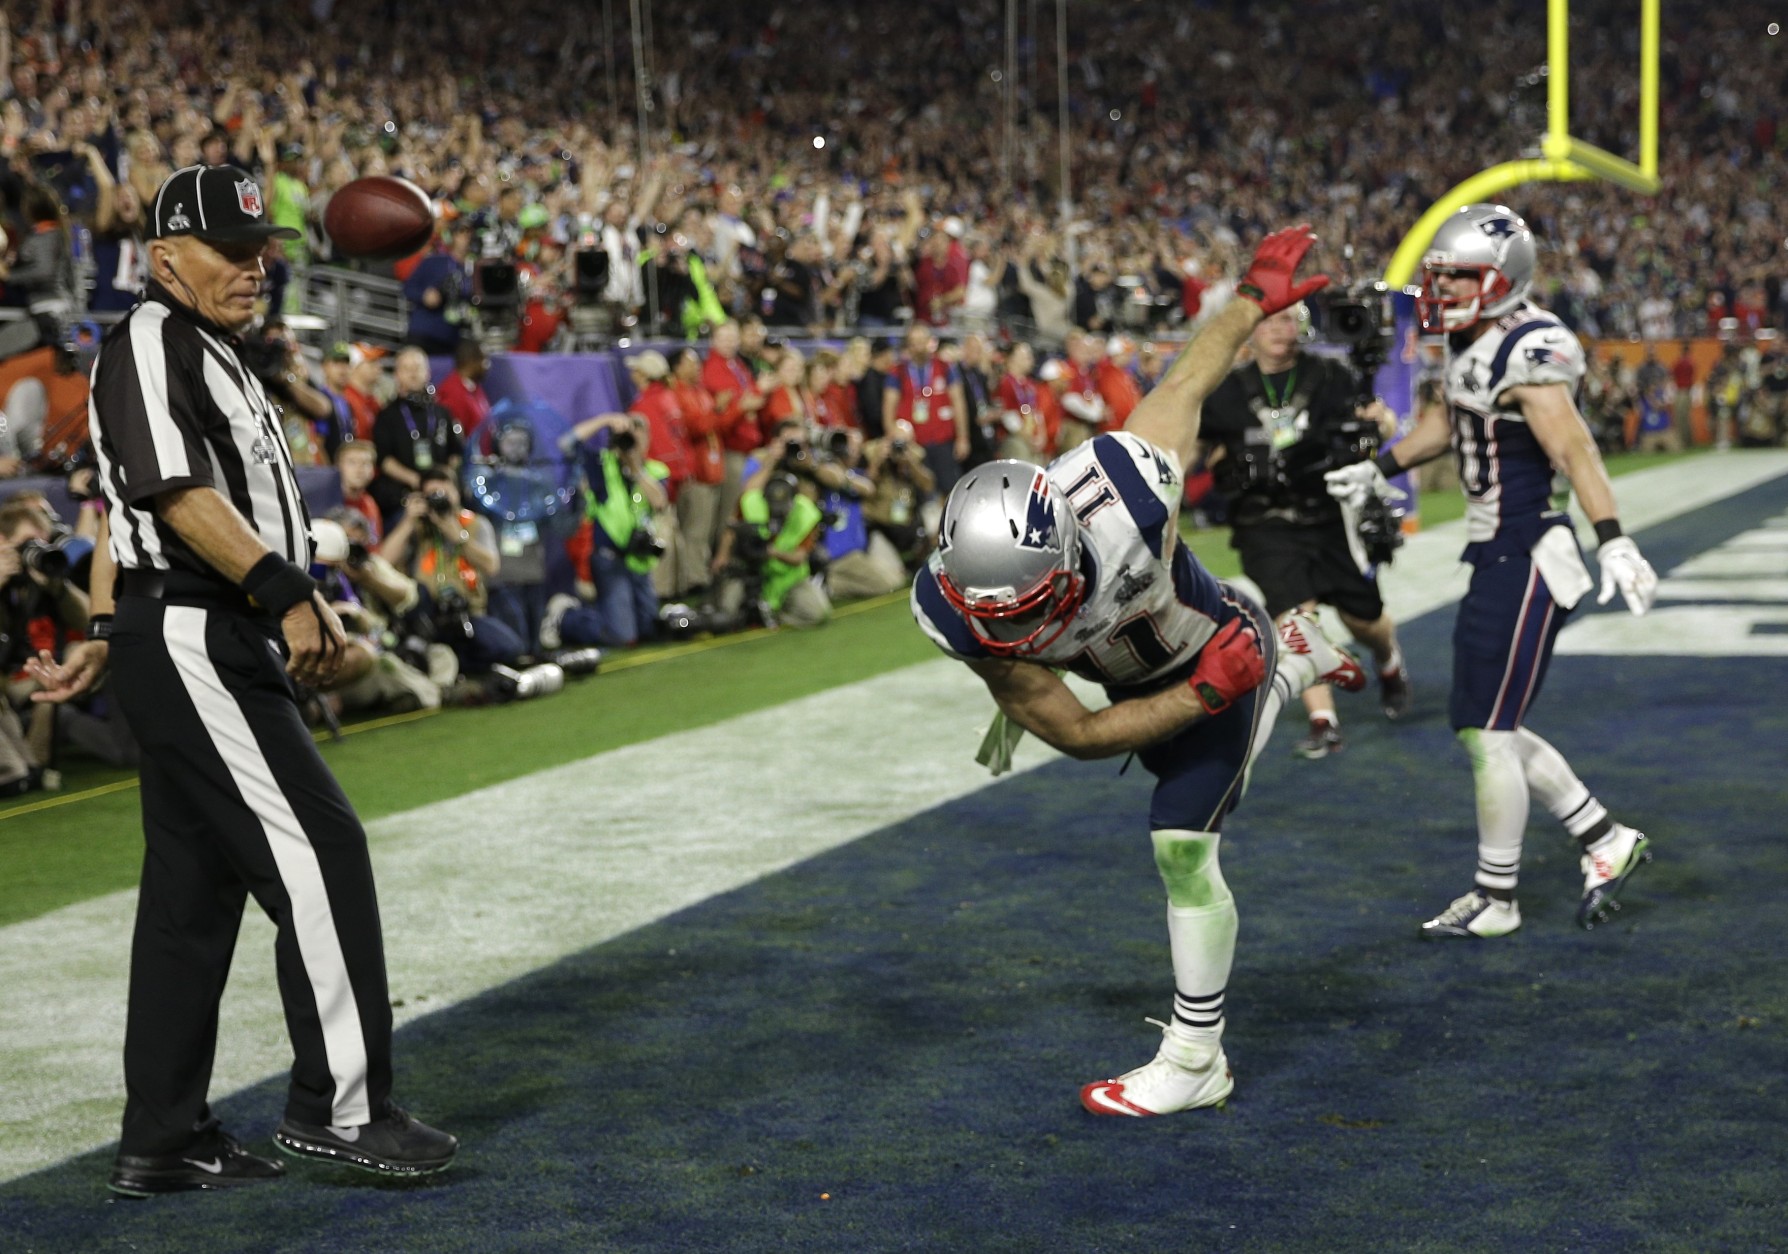 New England Patriots wide receiver Julian Edelman (11) spikes the ball after catching a three-yard touchdown pass during the second half of NFL Super Bowl XLIX football game against the Seattle Seahawks Sunday, Feb. 1, 2015, in Glendale, Ariz. (AP Photo/David J. Phillip)